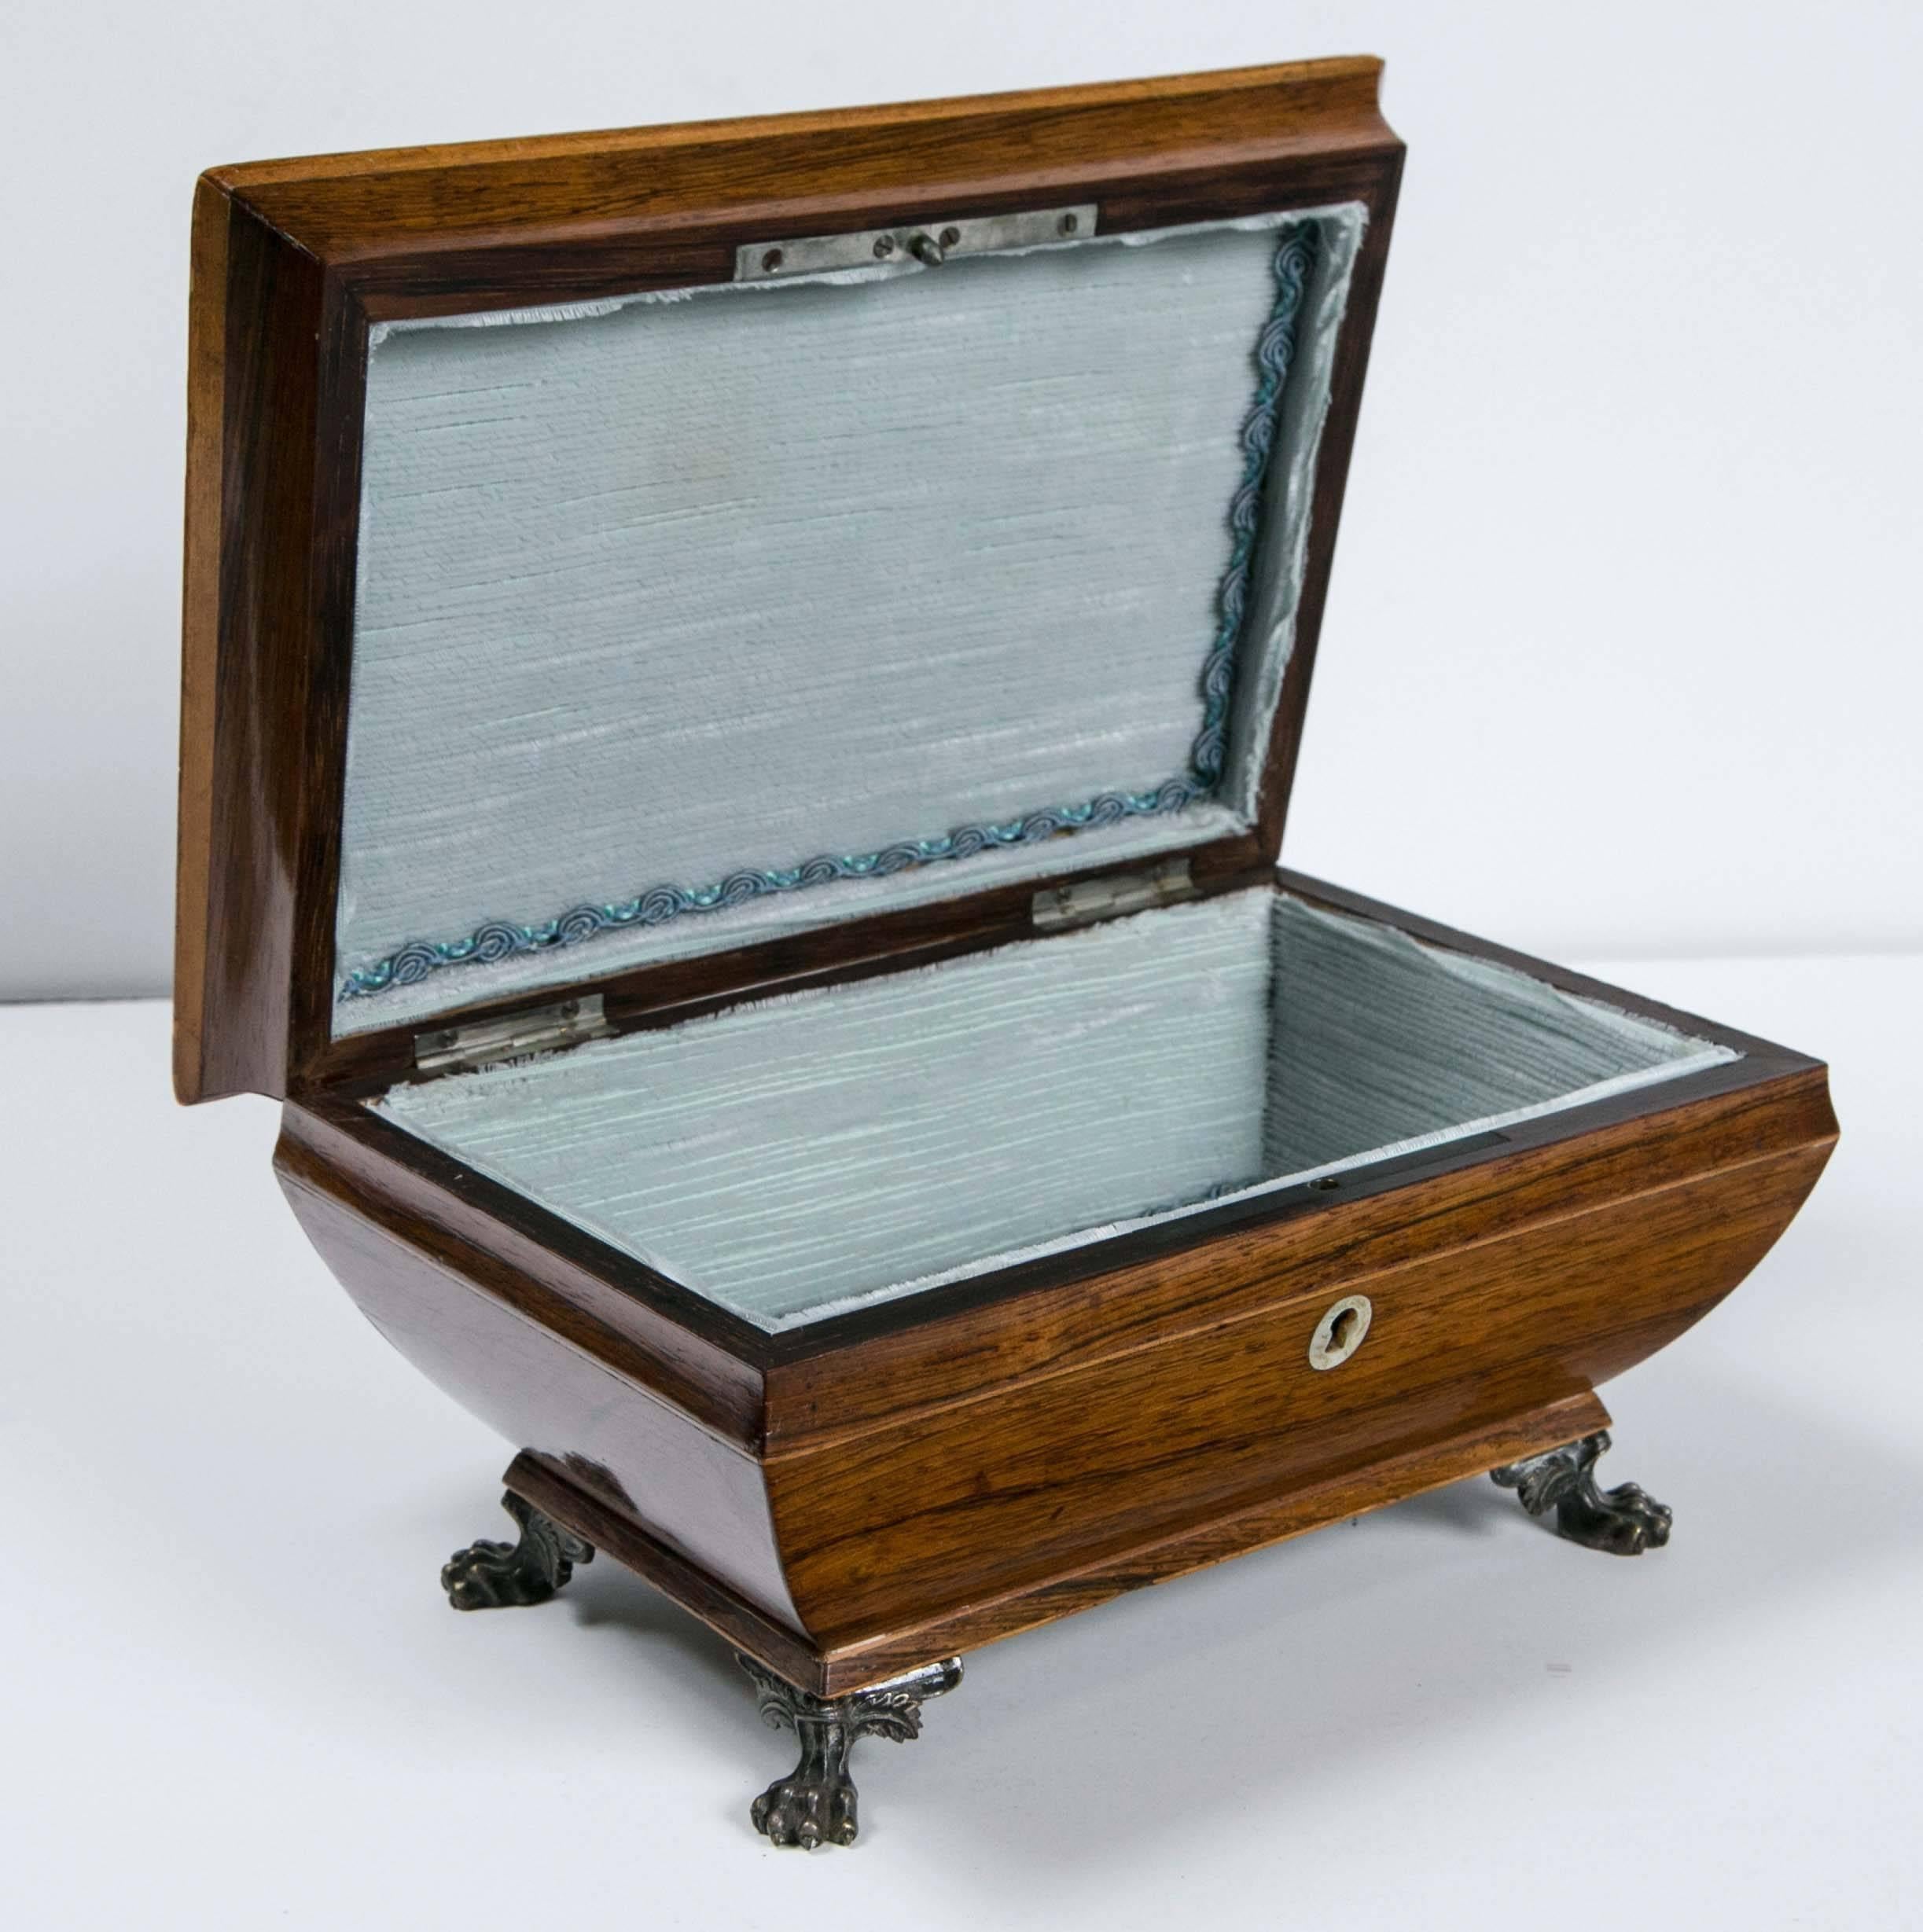 Antique 1820 rosewood jewelry box. It has mother-of-pearl inlay, brass feet, and an unusual shape. The box with its petite small feet, gives it a tier layer illusion. The inside is light blue satin with a deeper blue brocade welting. It has no key.